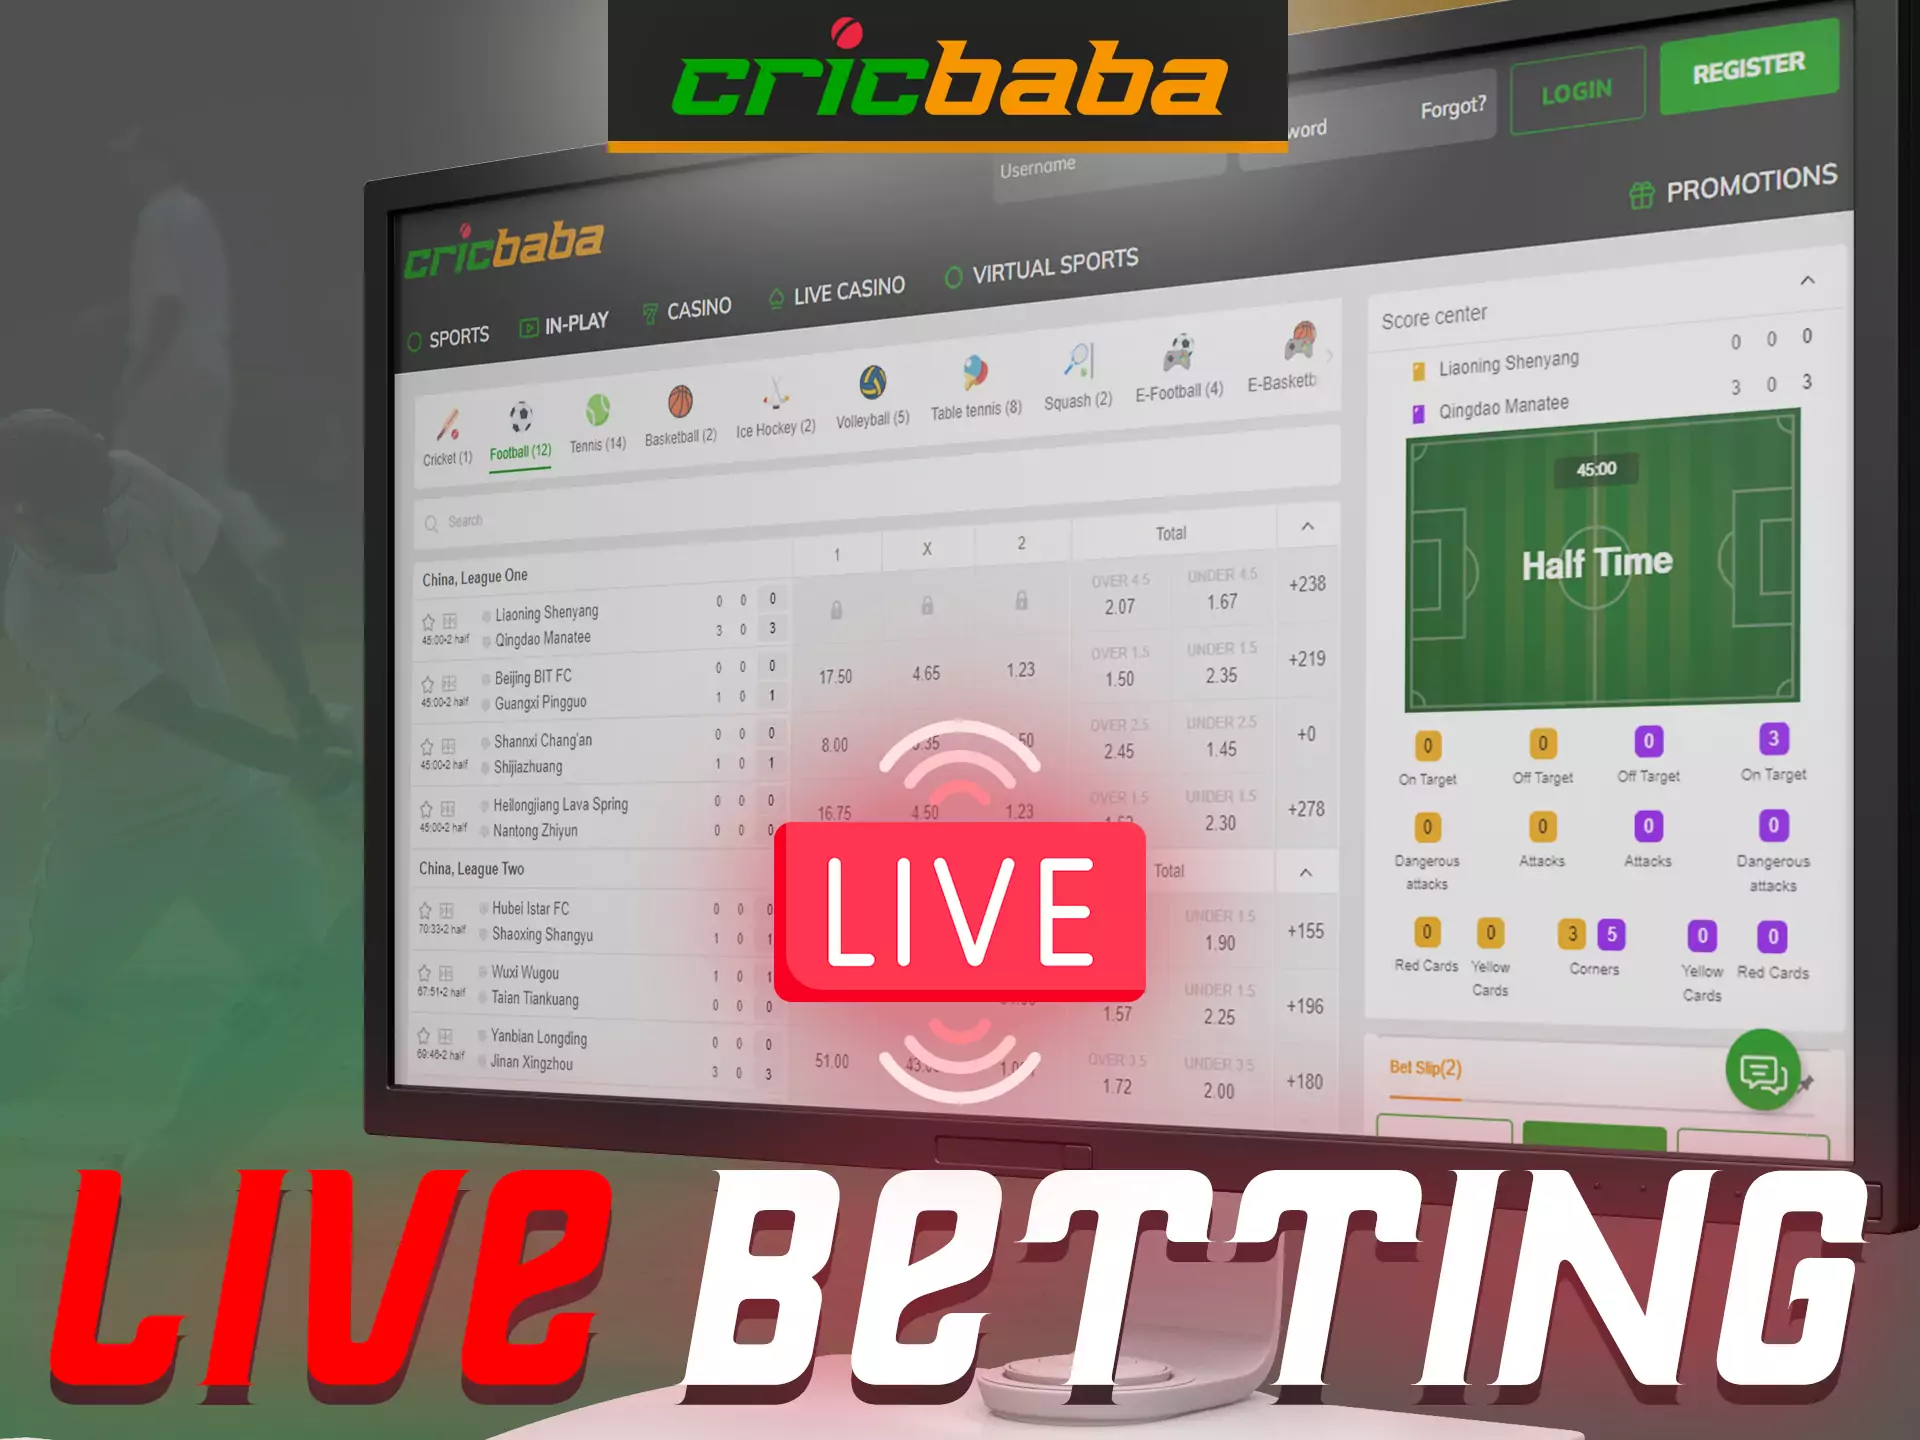 Place bets on Cricbaba on any sports matches even if the event has already started.